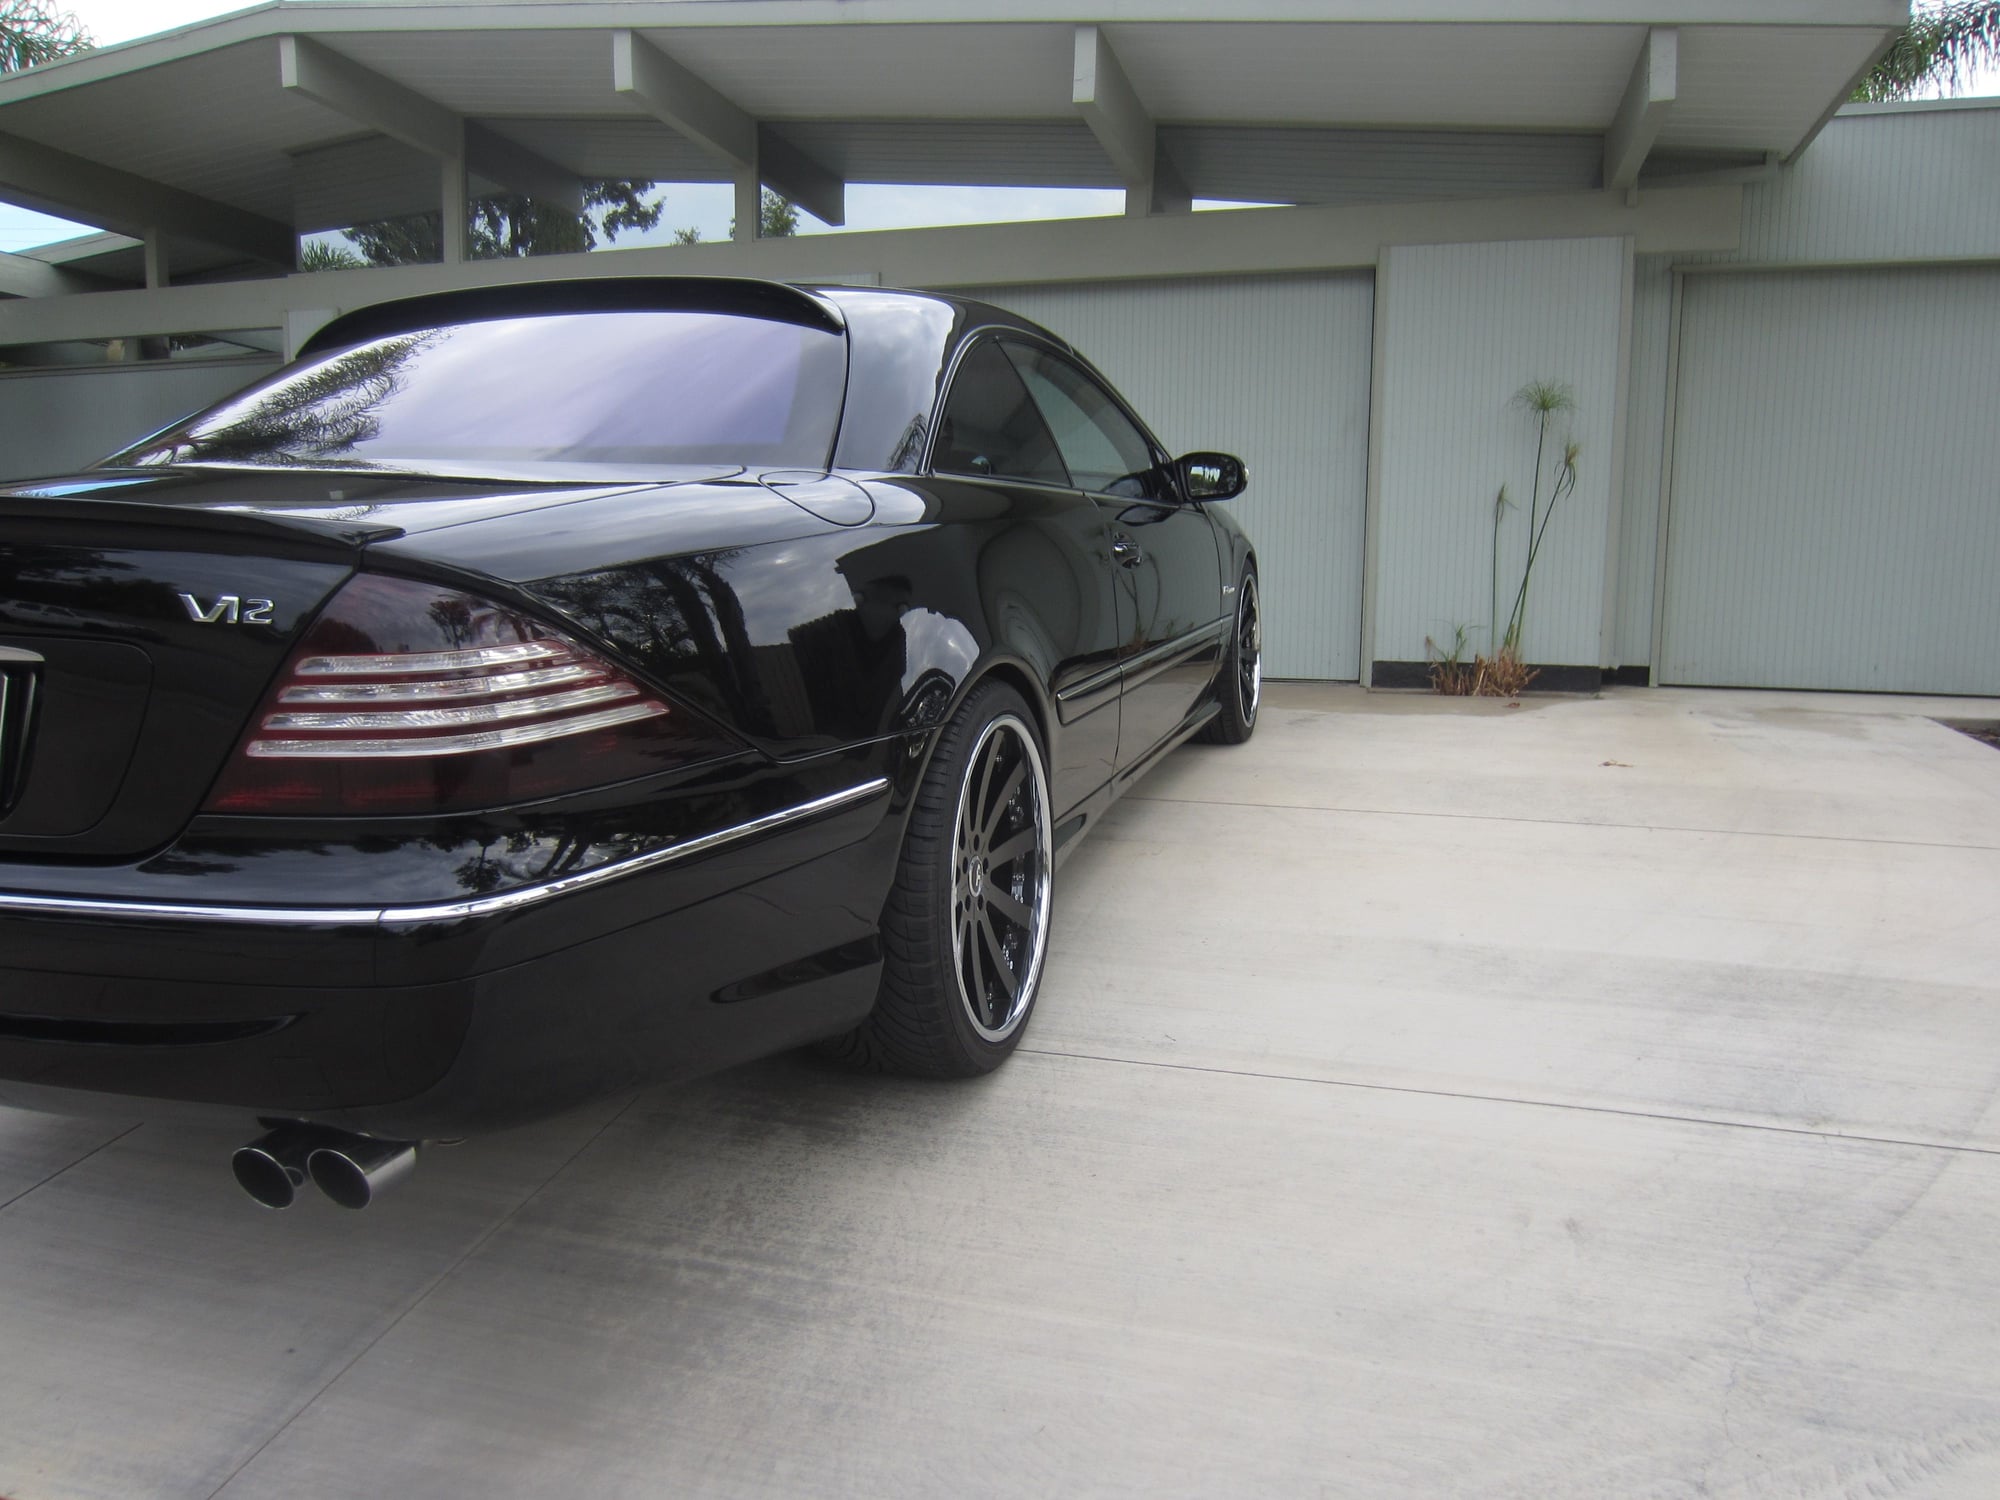 2003 Mercedes-Benz CL600 - 2003 Mercedes CL 65 Clone 625HP 745 Ft Lbs Torque - Used - VIN WDBPJ76J93A032432 - 55,000 Miles - 12 cyl - 2WD - Automatic - Coupe - Black - Orange, CA 92865, United States